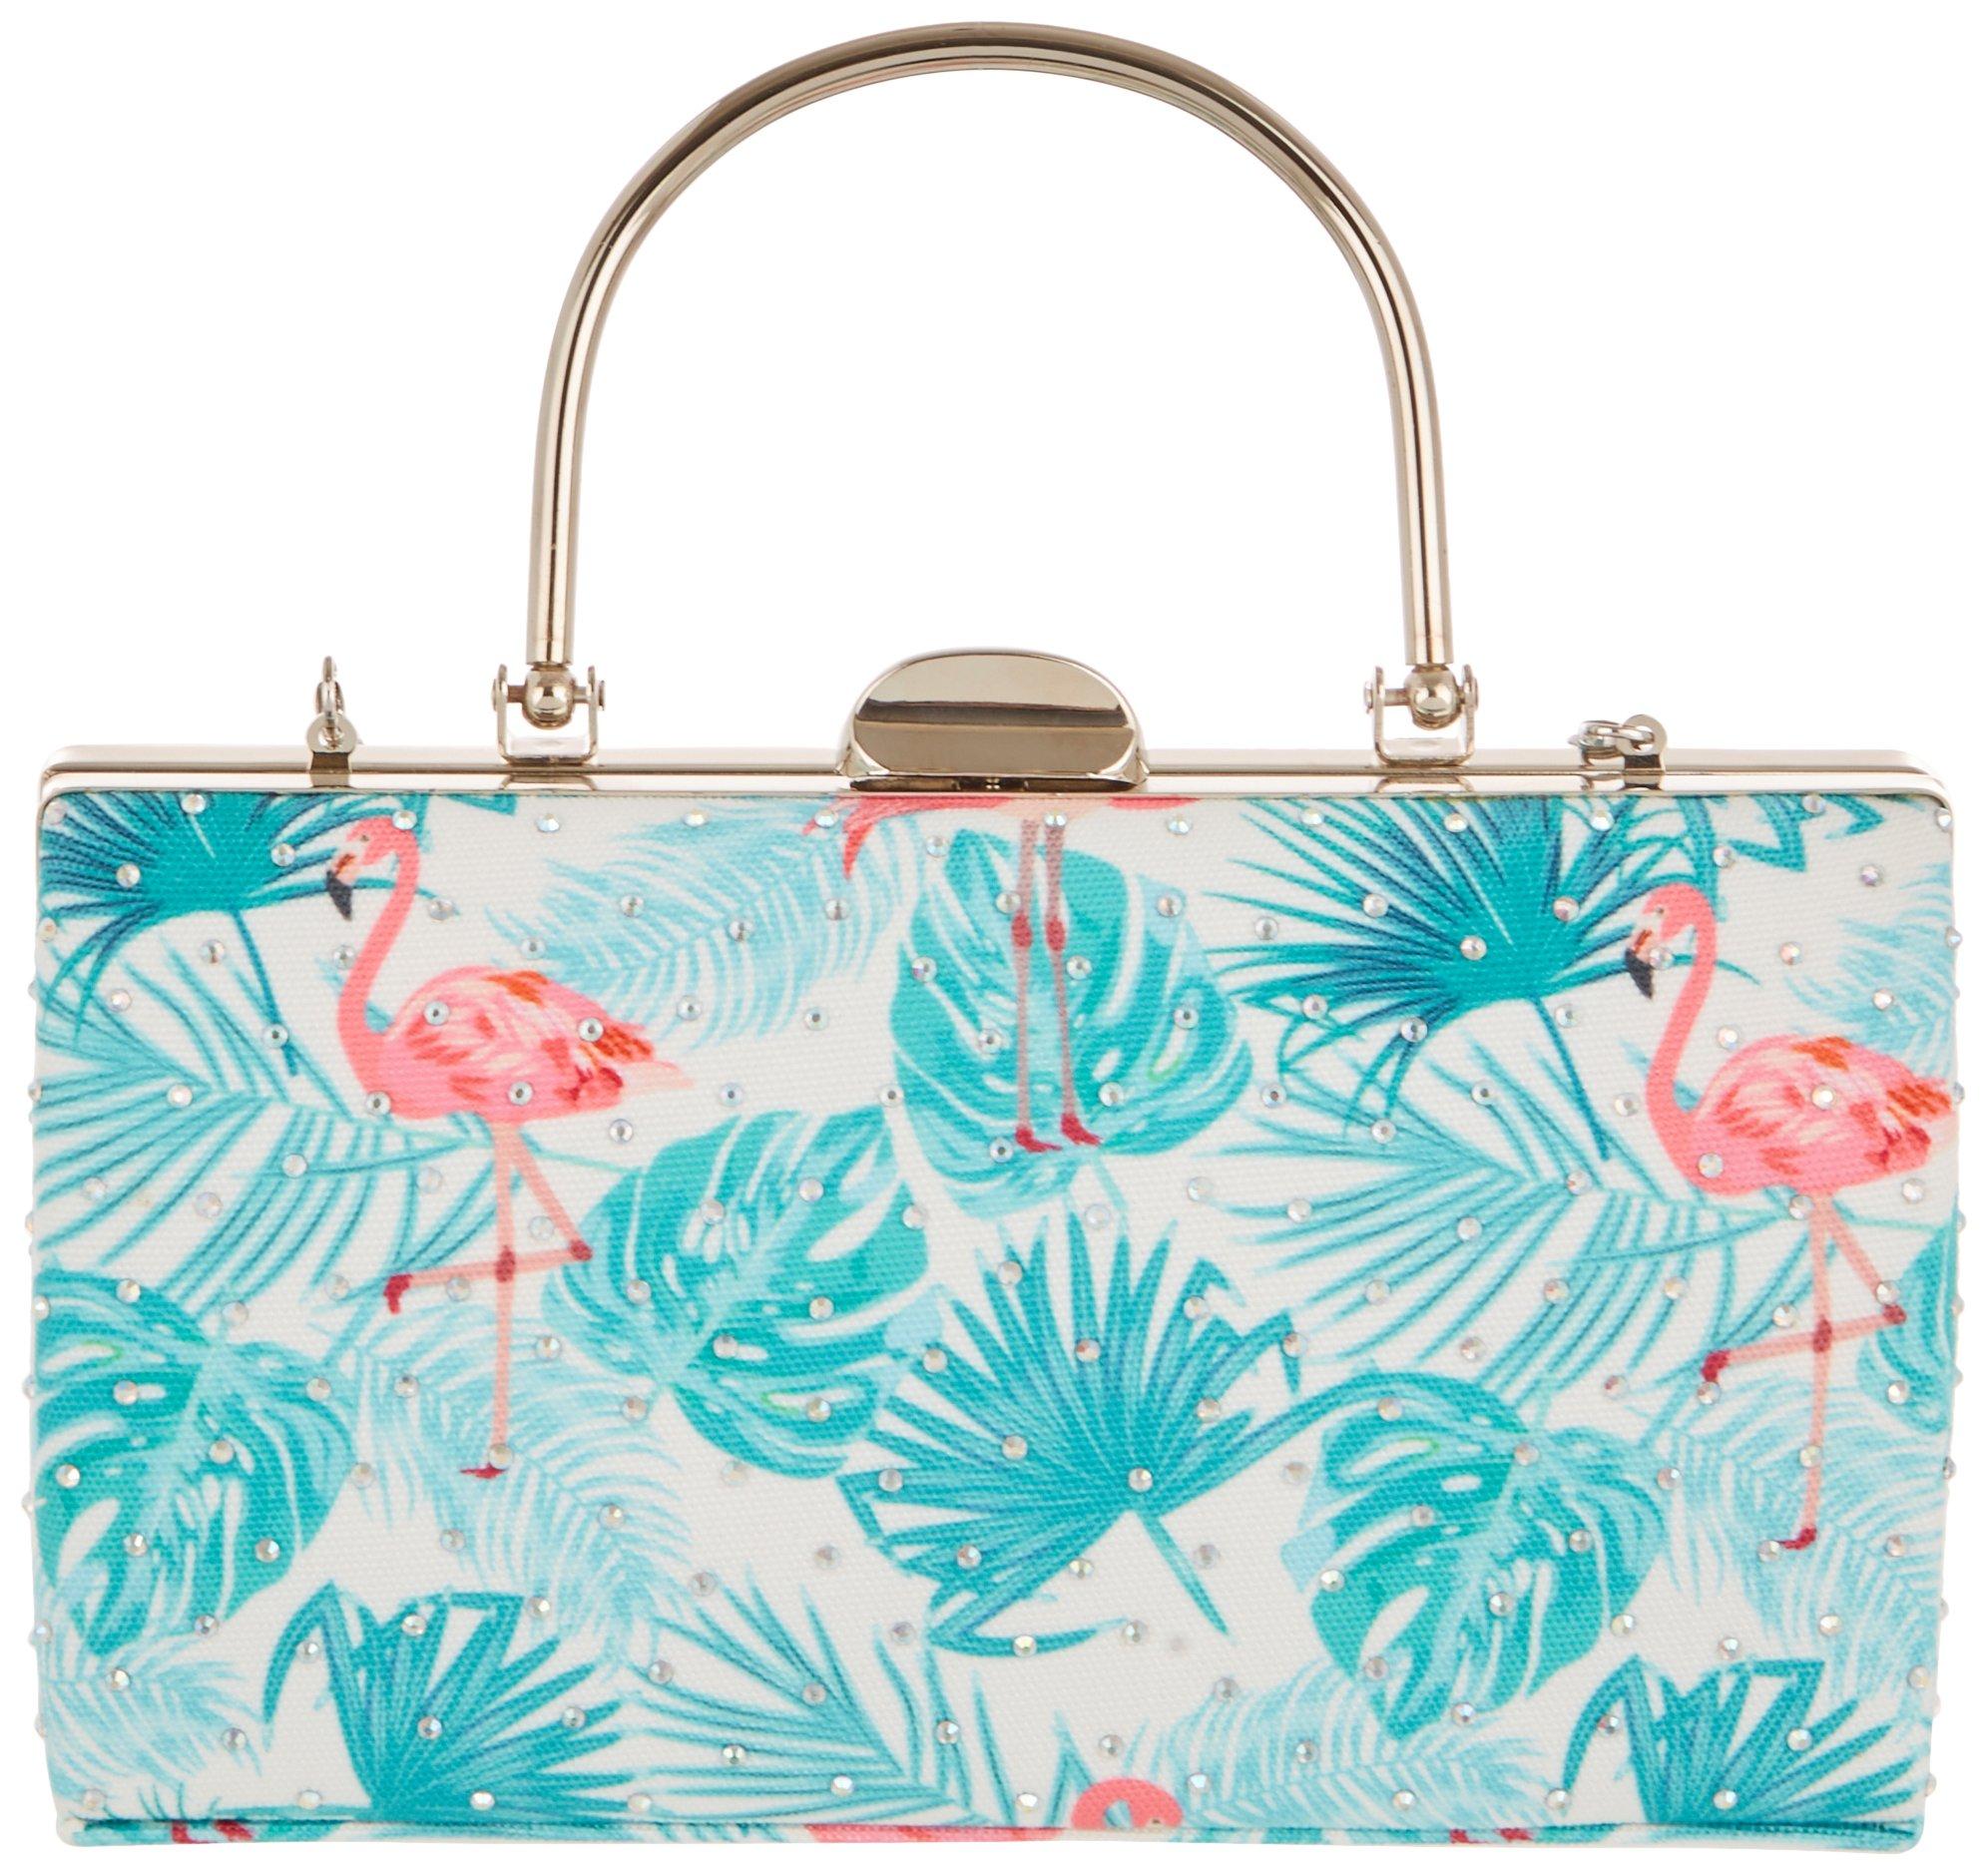 D'Margeaux Flamingo Print Crystal Front Crossbody Clutch